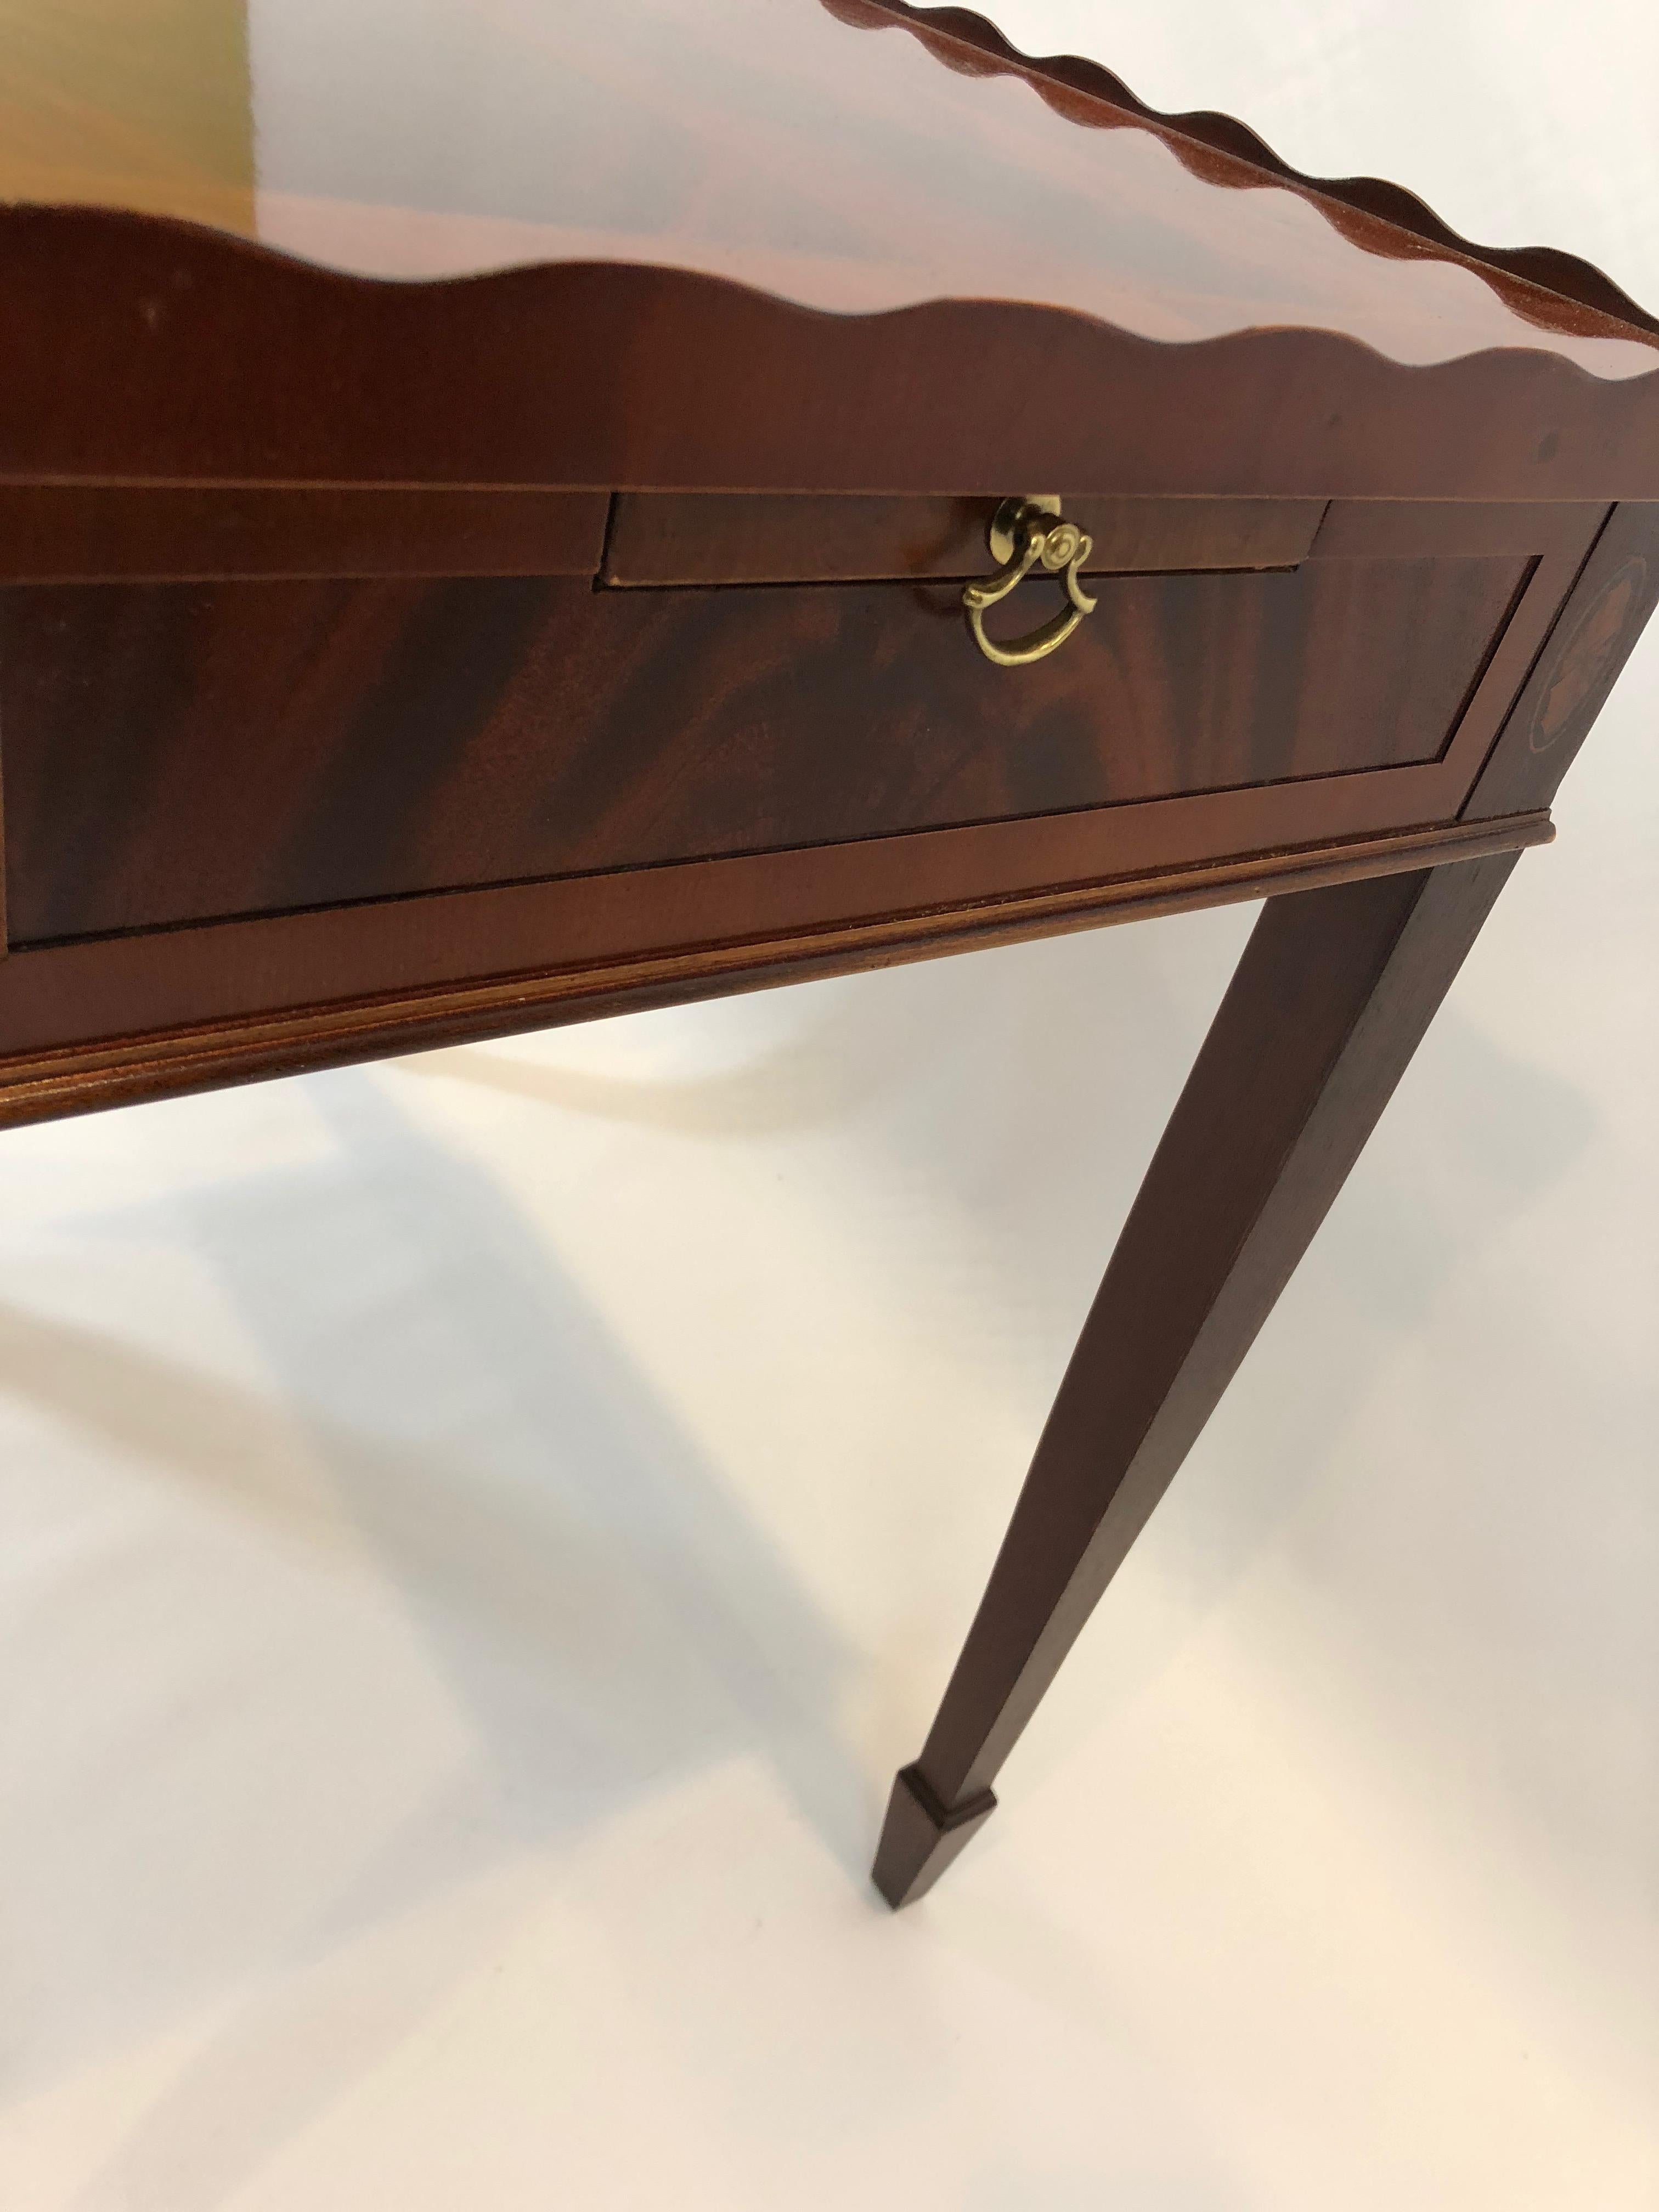 Late 20th Century Superb Heckman Mahogany and Inlaid Tea Side Table with Scalloped Edge